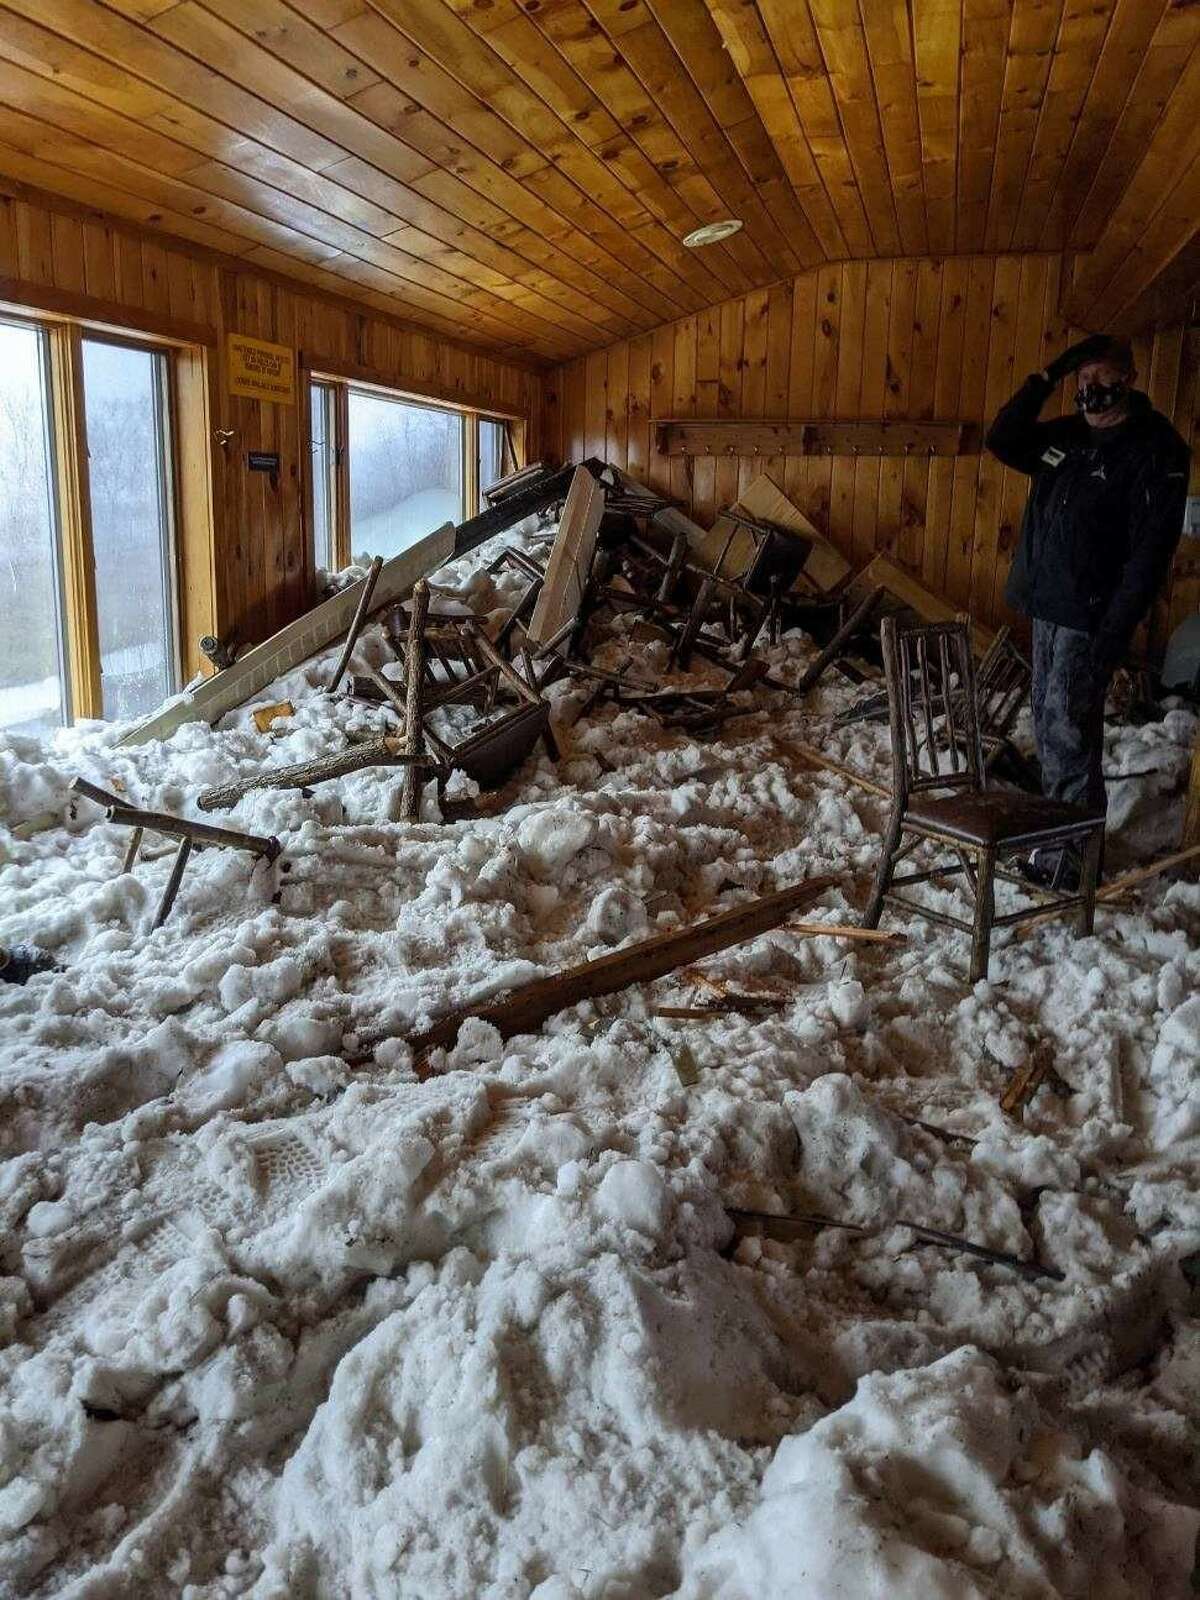 Belleayre Mountain ski center's Overlook Lodge was damaged by a rare avalanche on Christmas Day last year that broke through windows and destroyed furniture. 